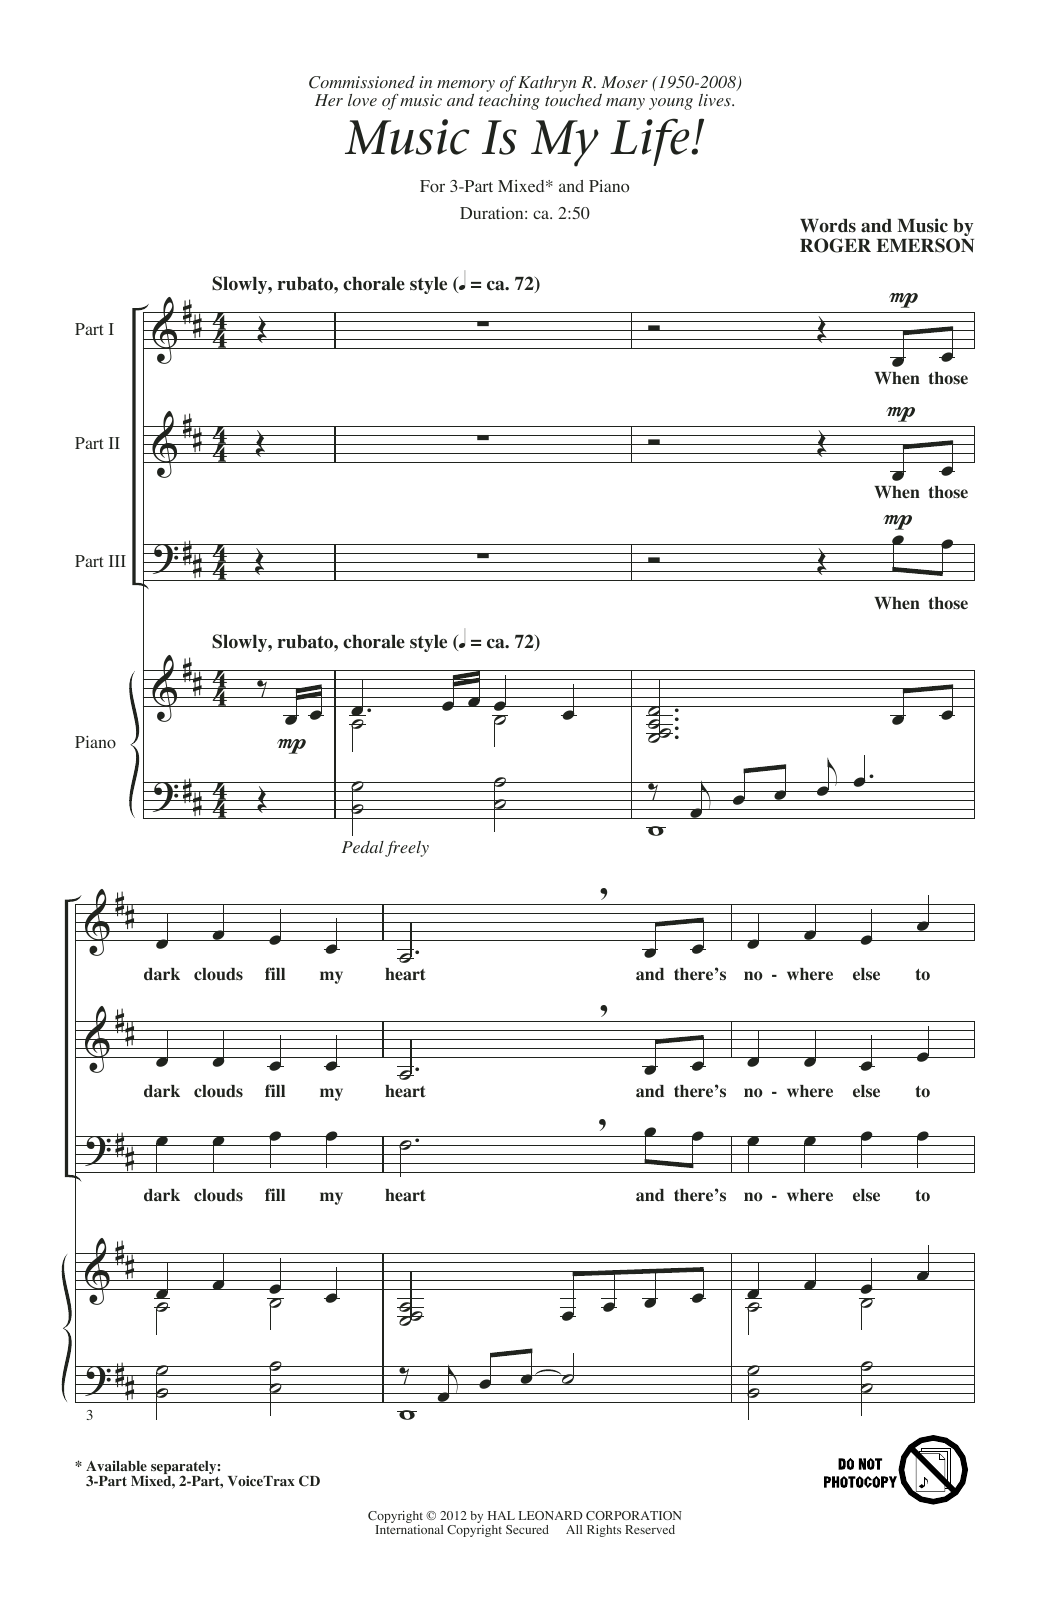 Download Roger Emerson Music Is My Life! Sheet Music